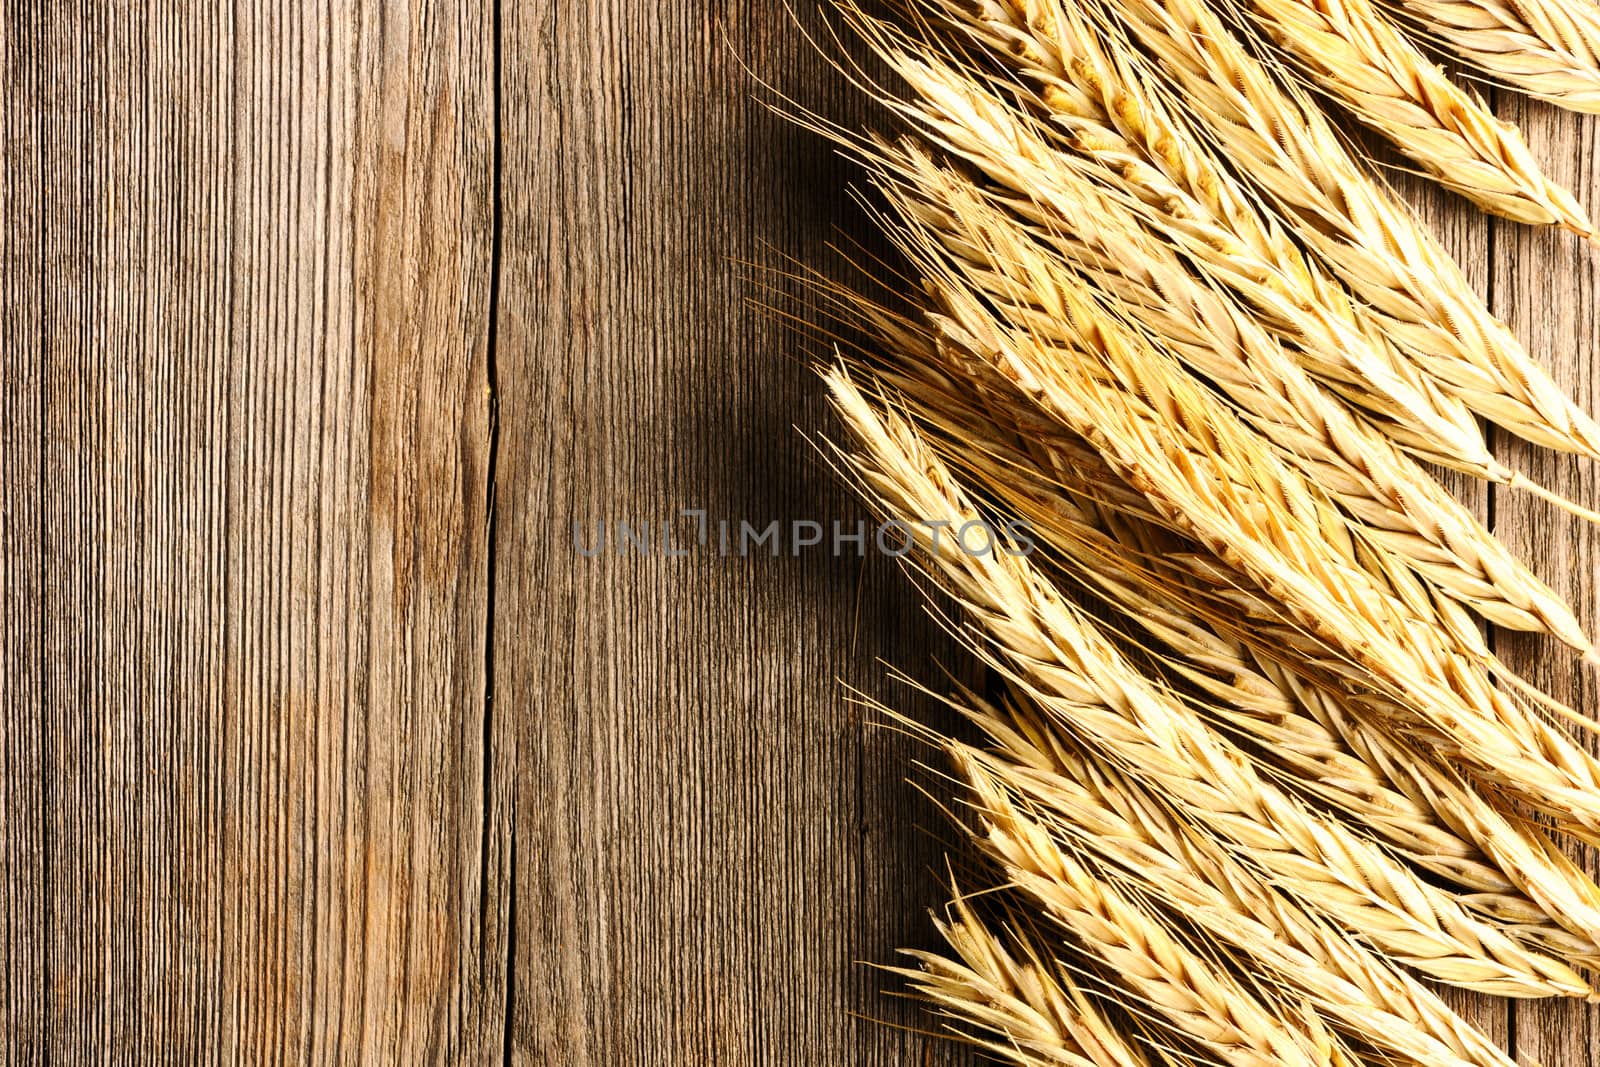 Rye spikelets over wooden background by haveseen